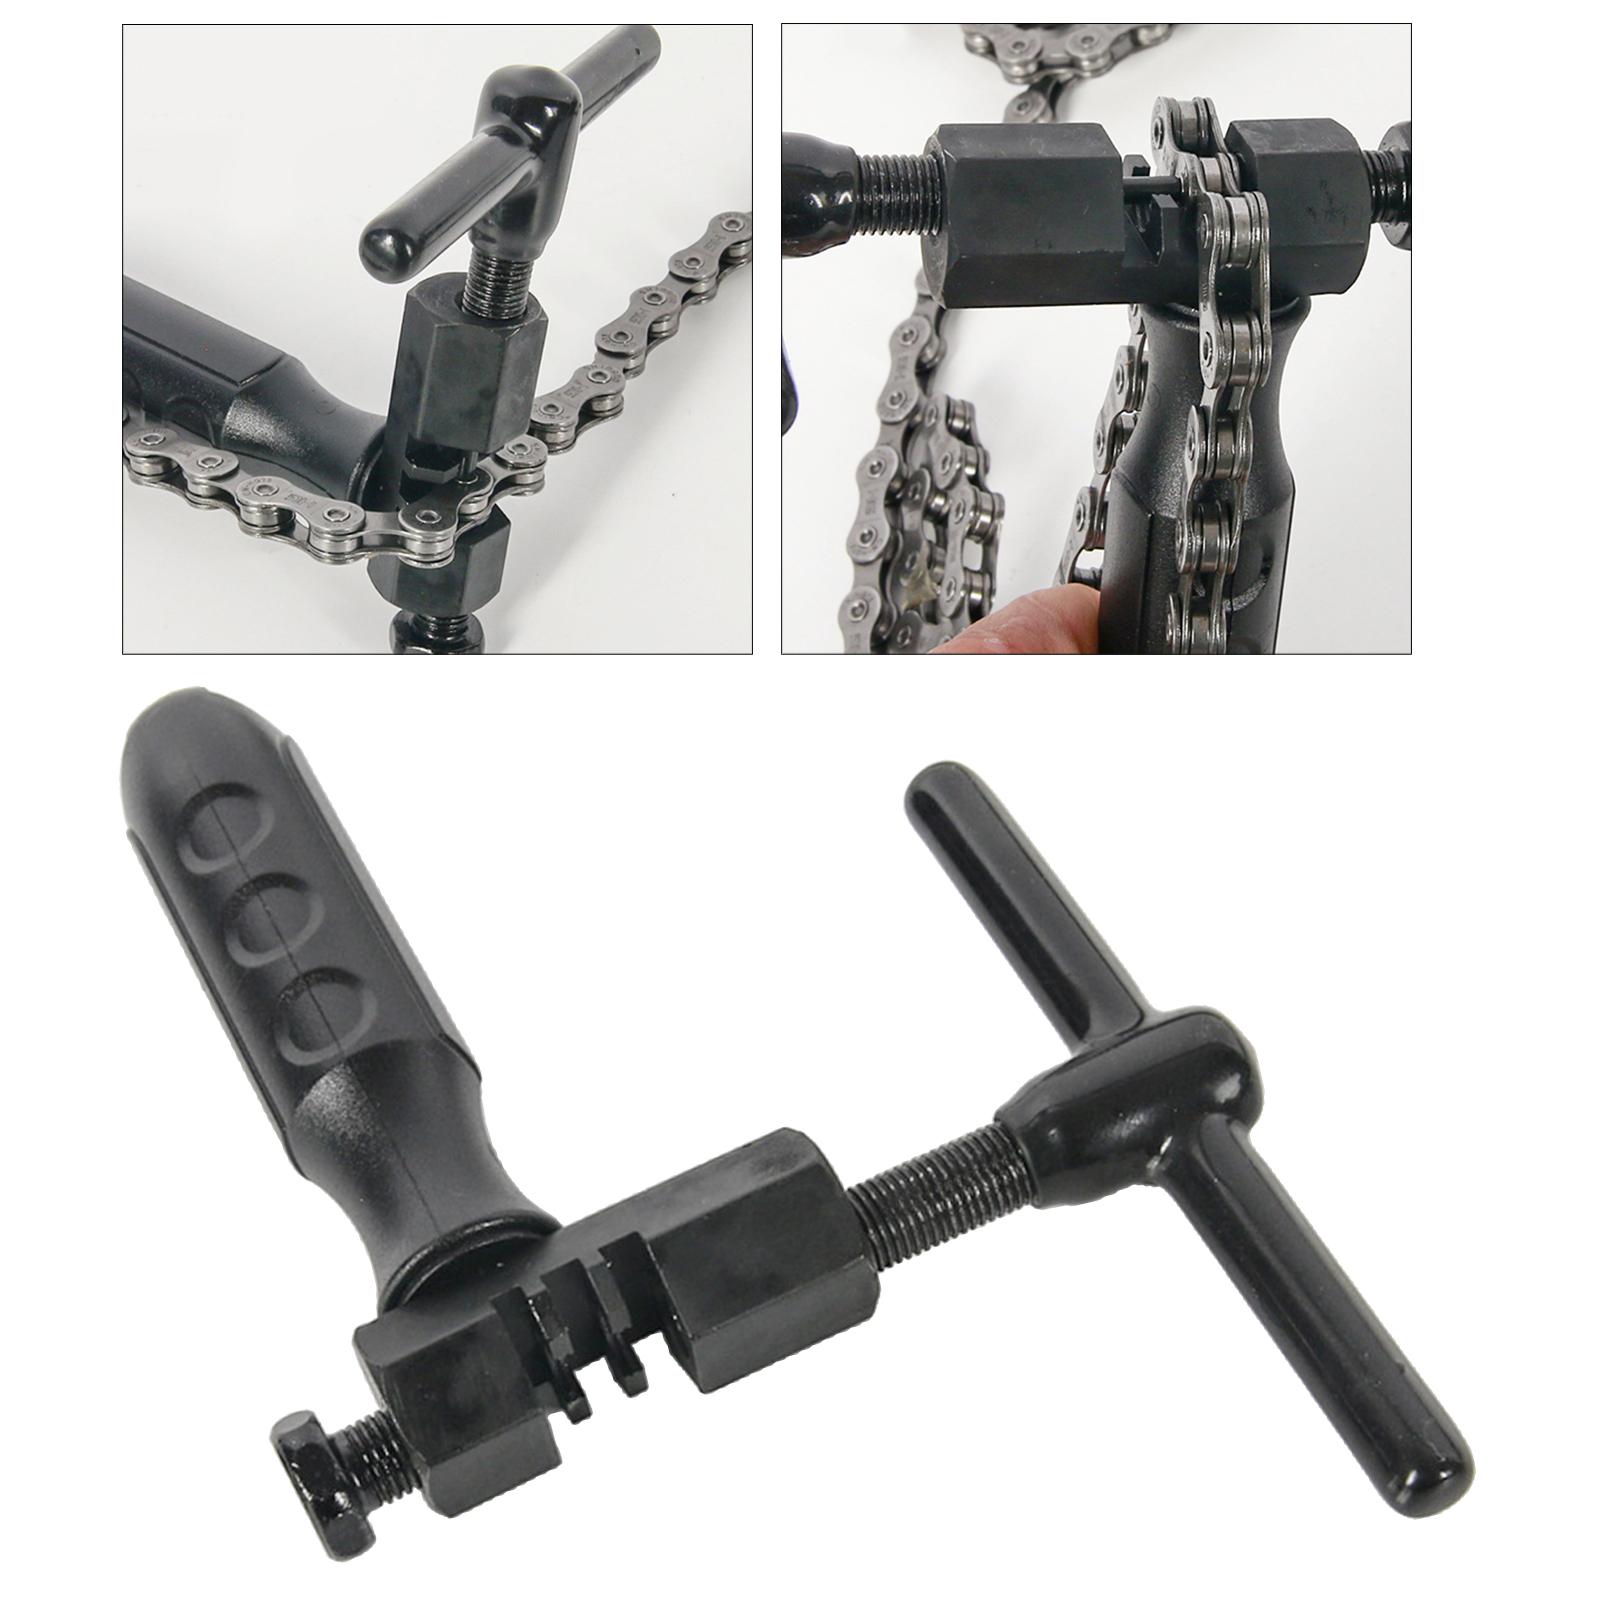 Bicycle Chain Breaker Repair Kit for Bicycle Outdoor Cycling MTB Bikes